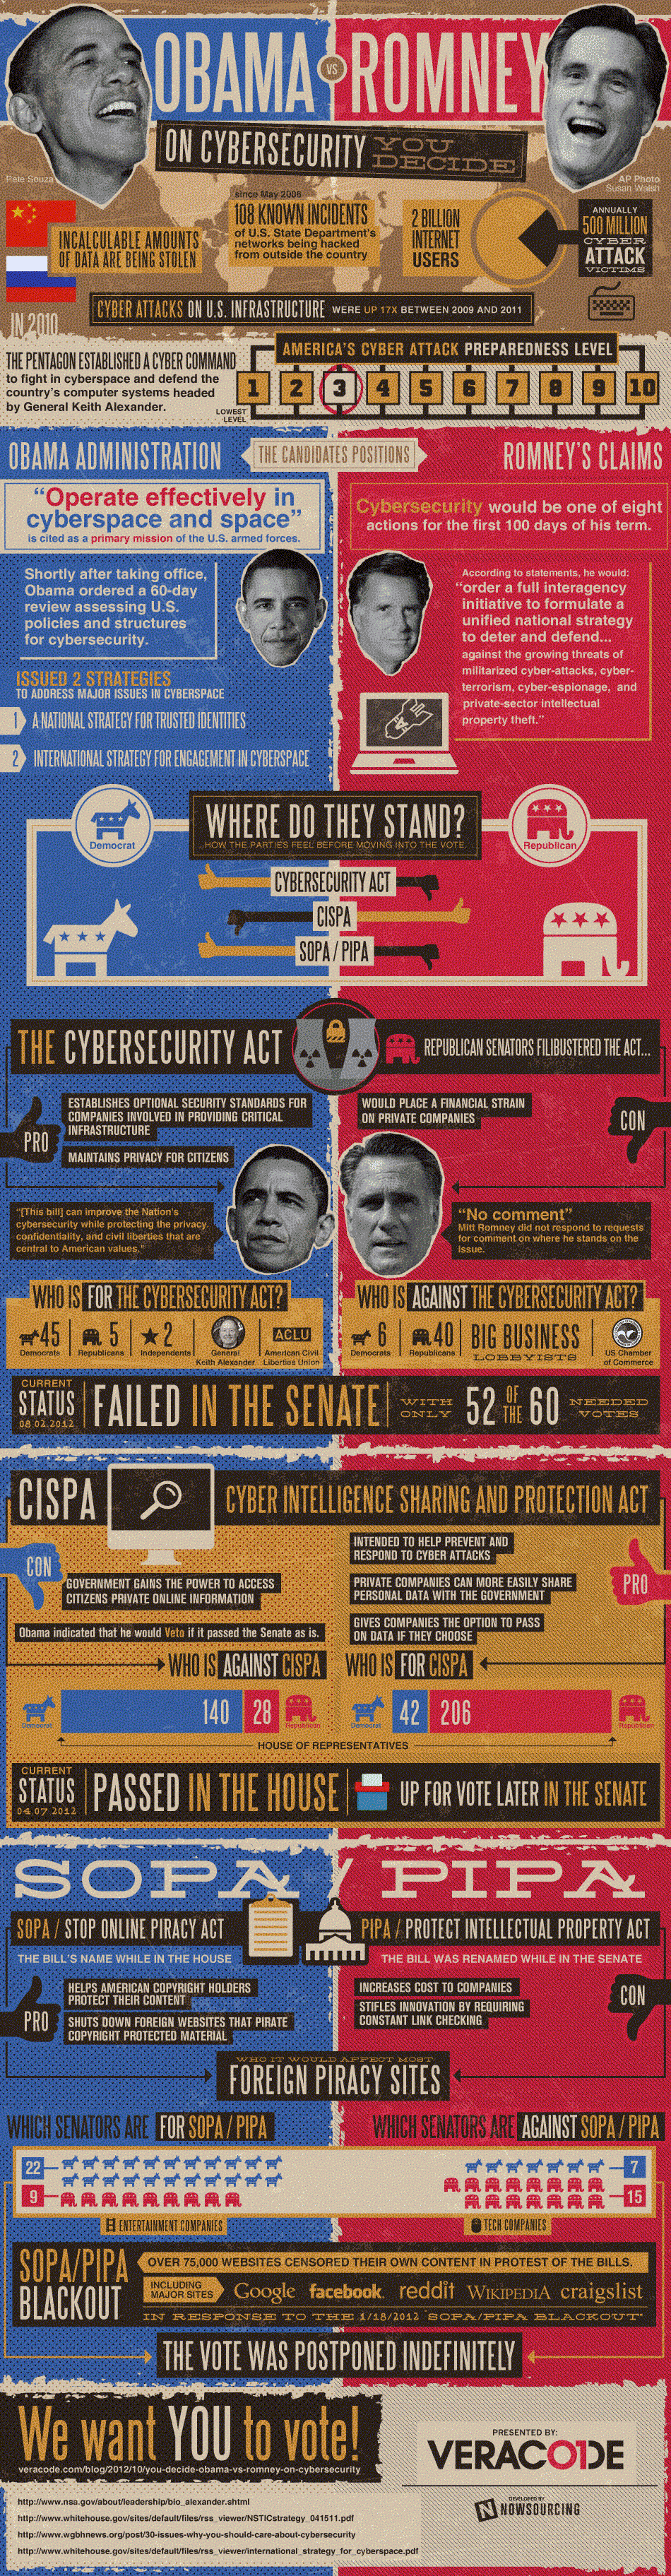 Obama vs. Romney On Cybersecurity [Infographic]